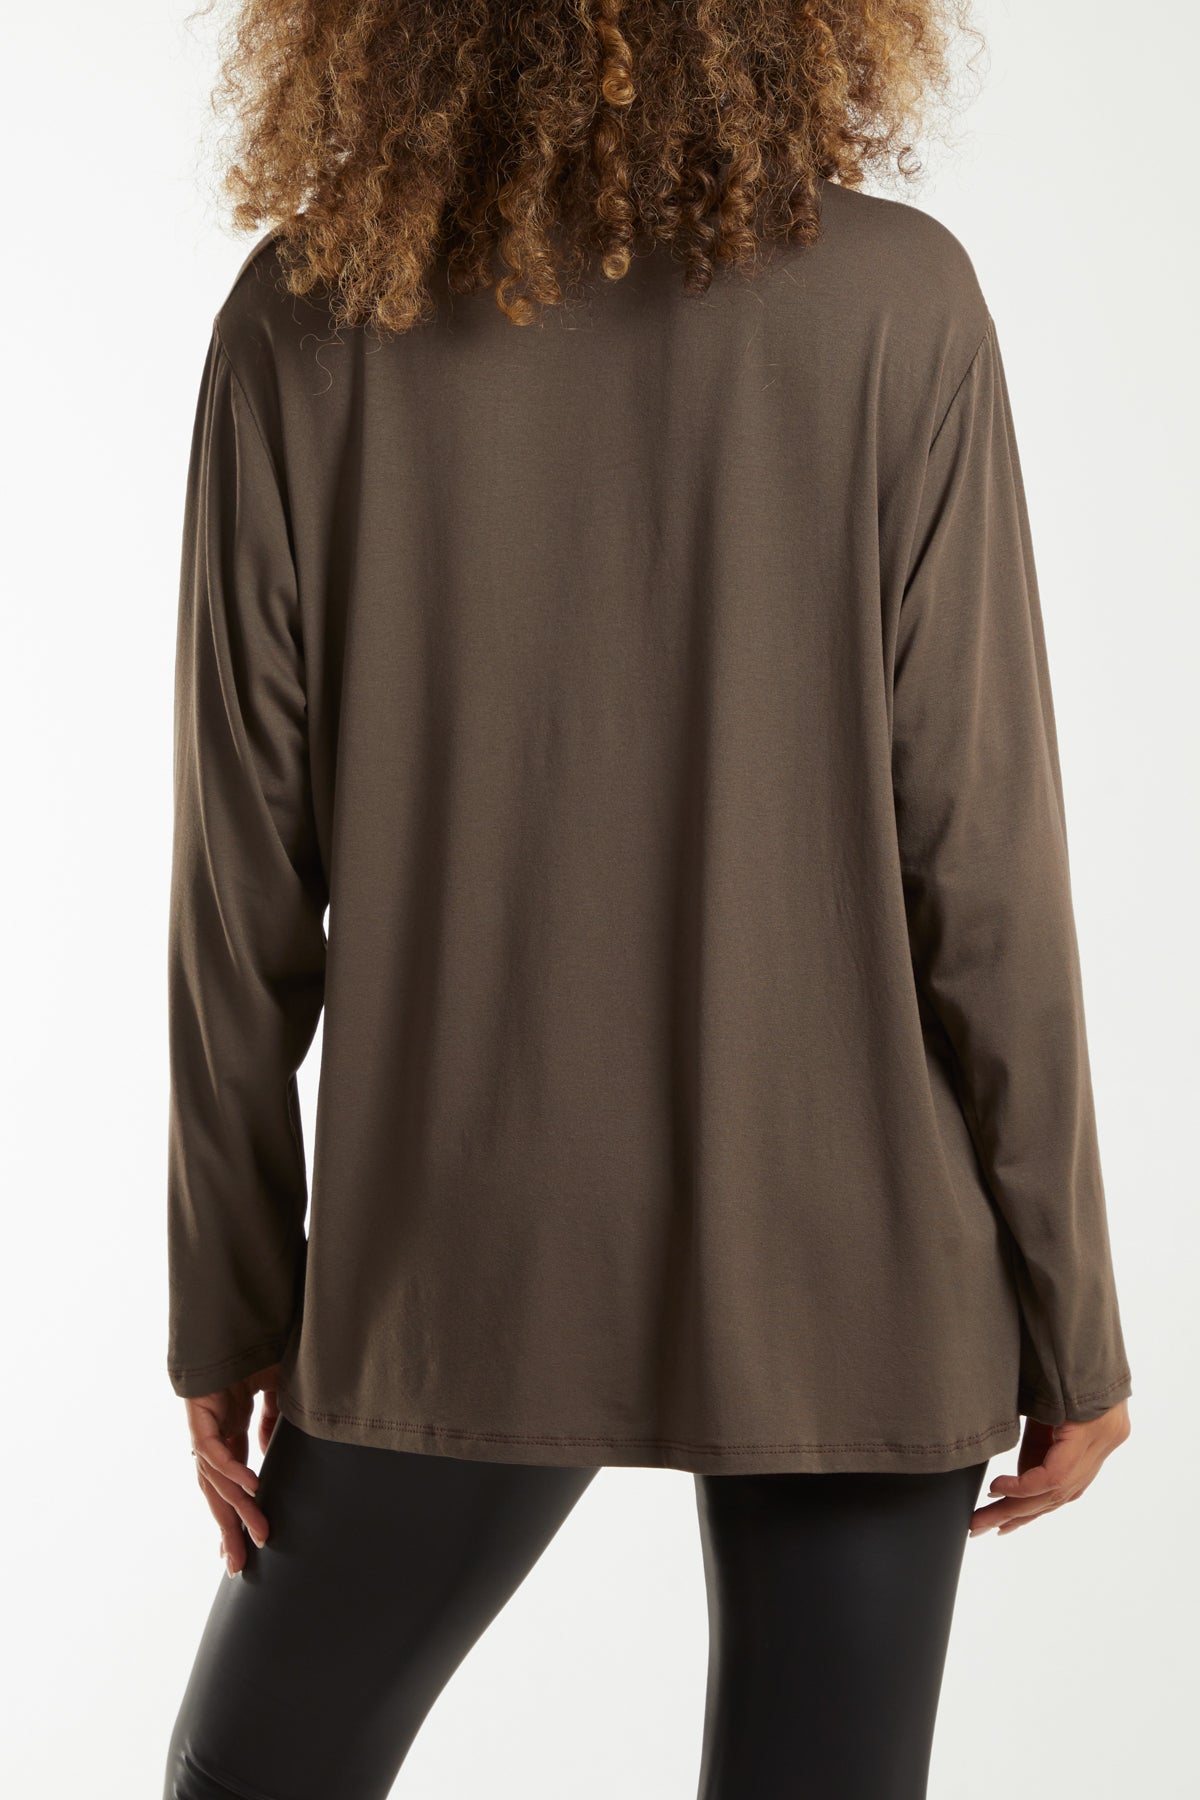 Long Sleeve Frill Turtle Neck Top